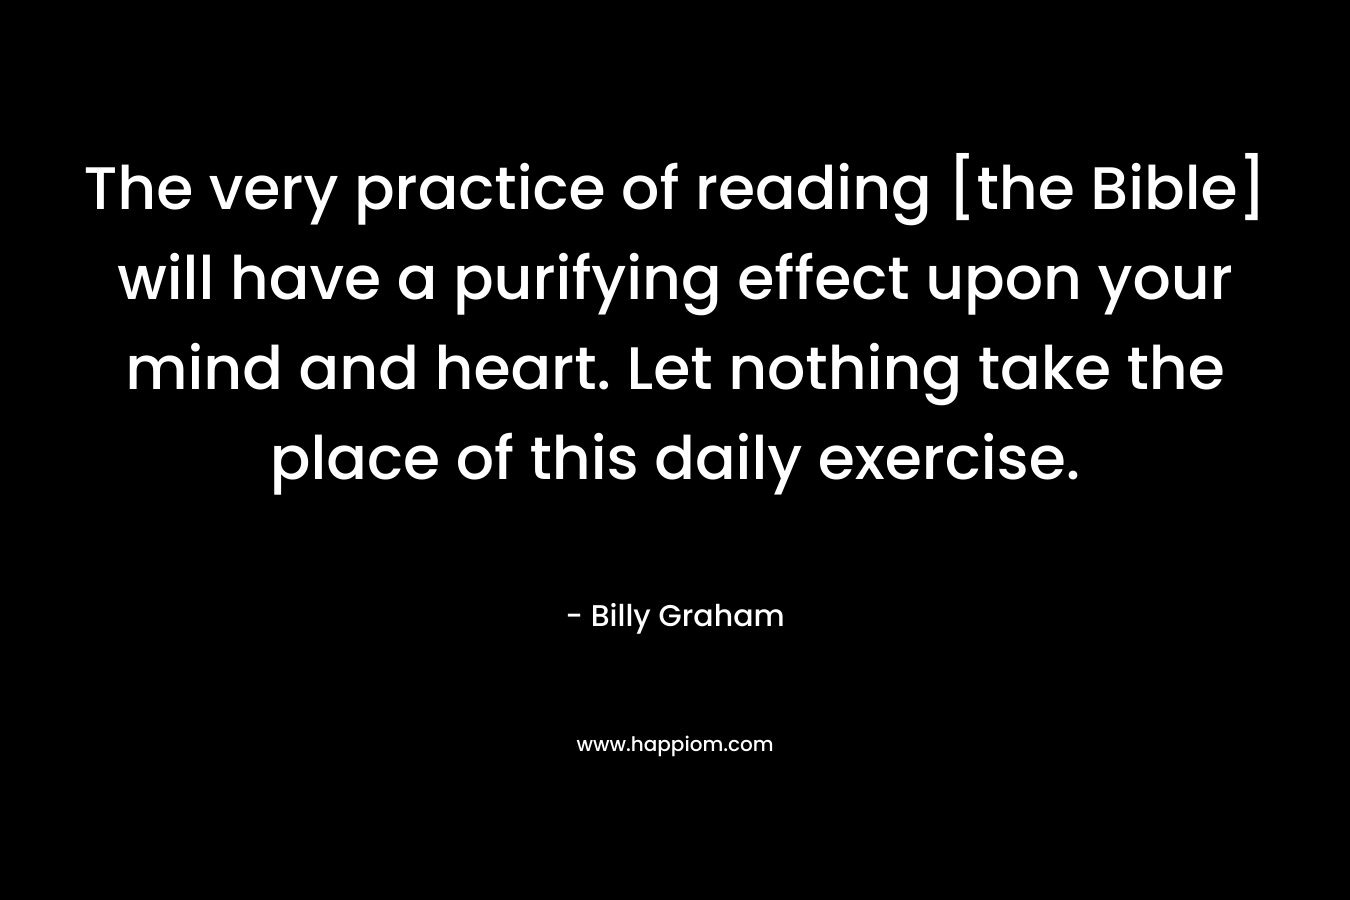 The very practice of reading [the Bible] will have a purifying effect upon your mind and heart. Let nothing take the place of this daily exercise.